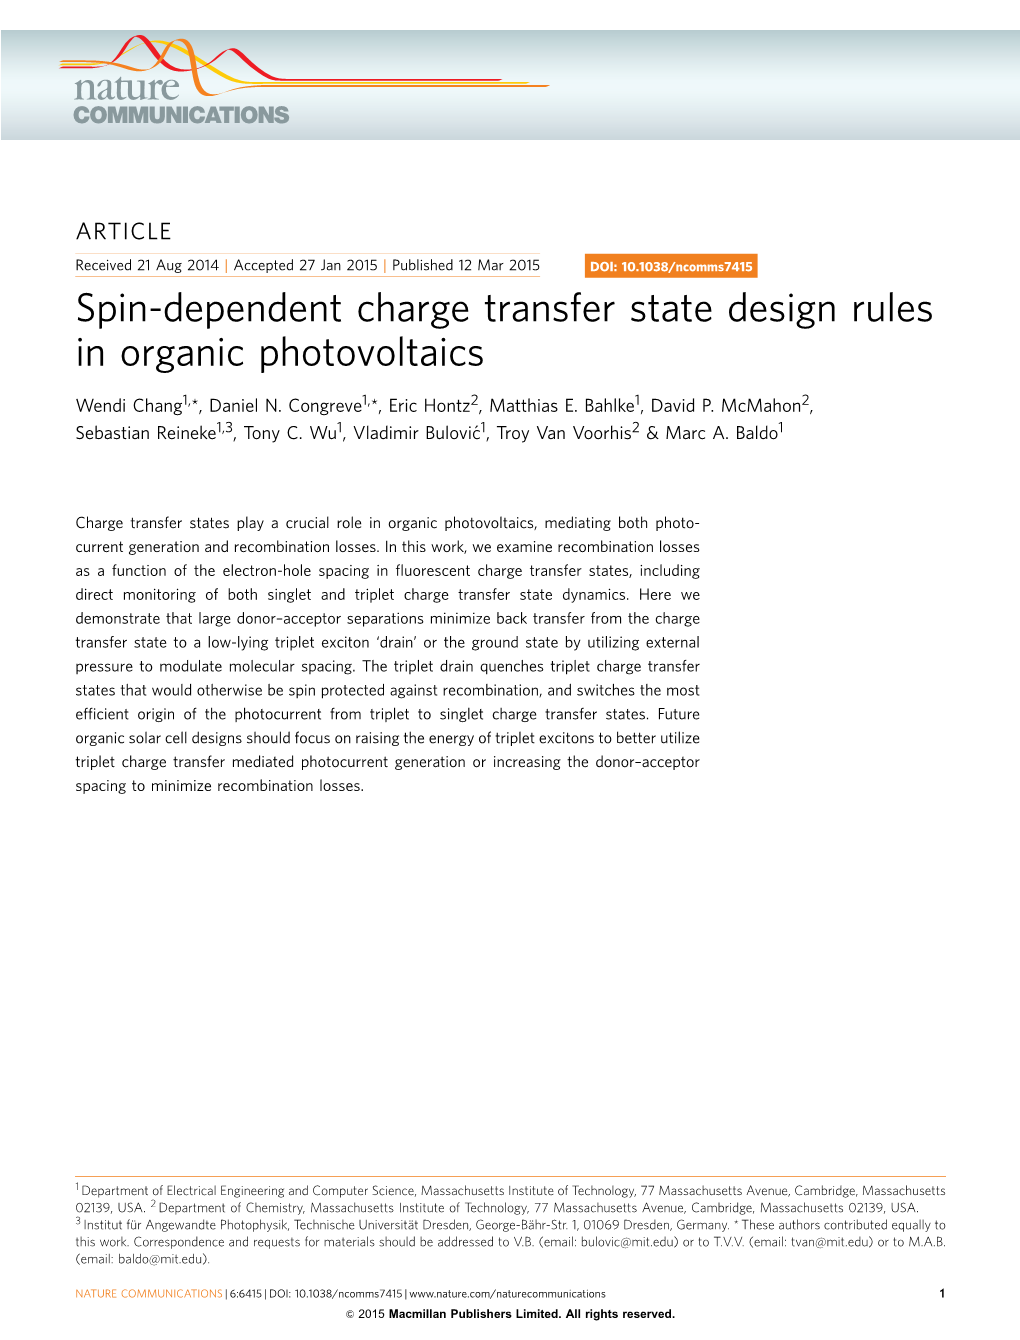 Spin-Dependent Charge Transfer State Design Rules in Organic Photovoltaics